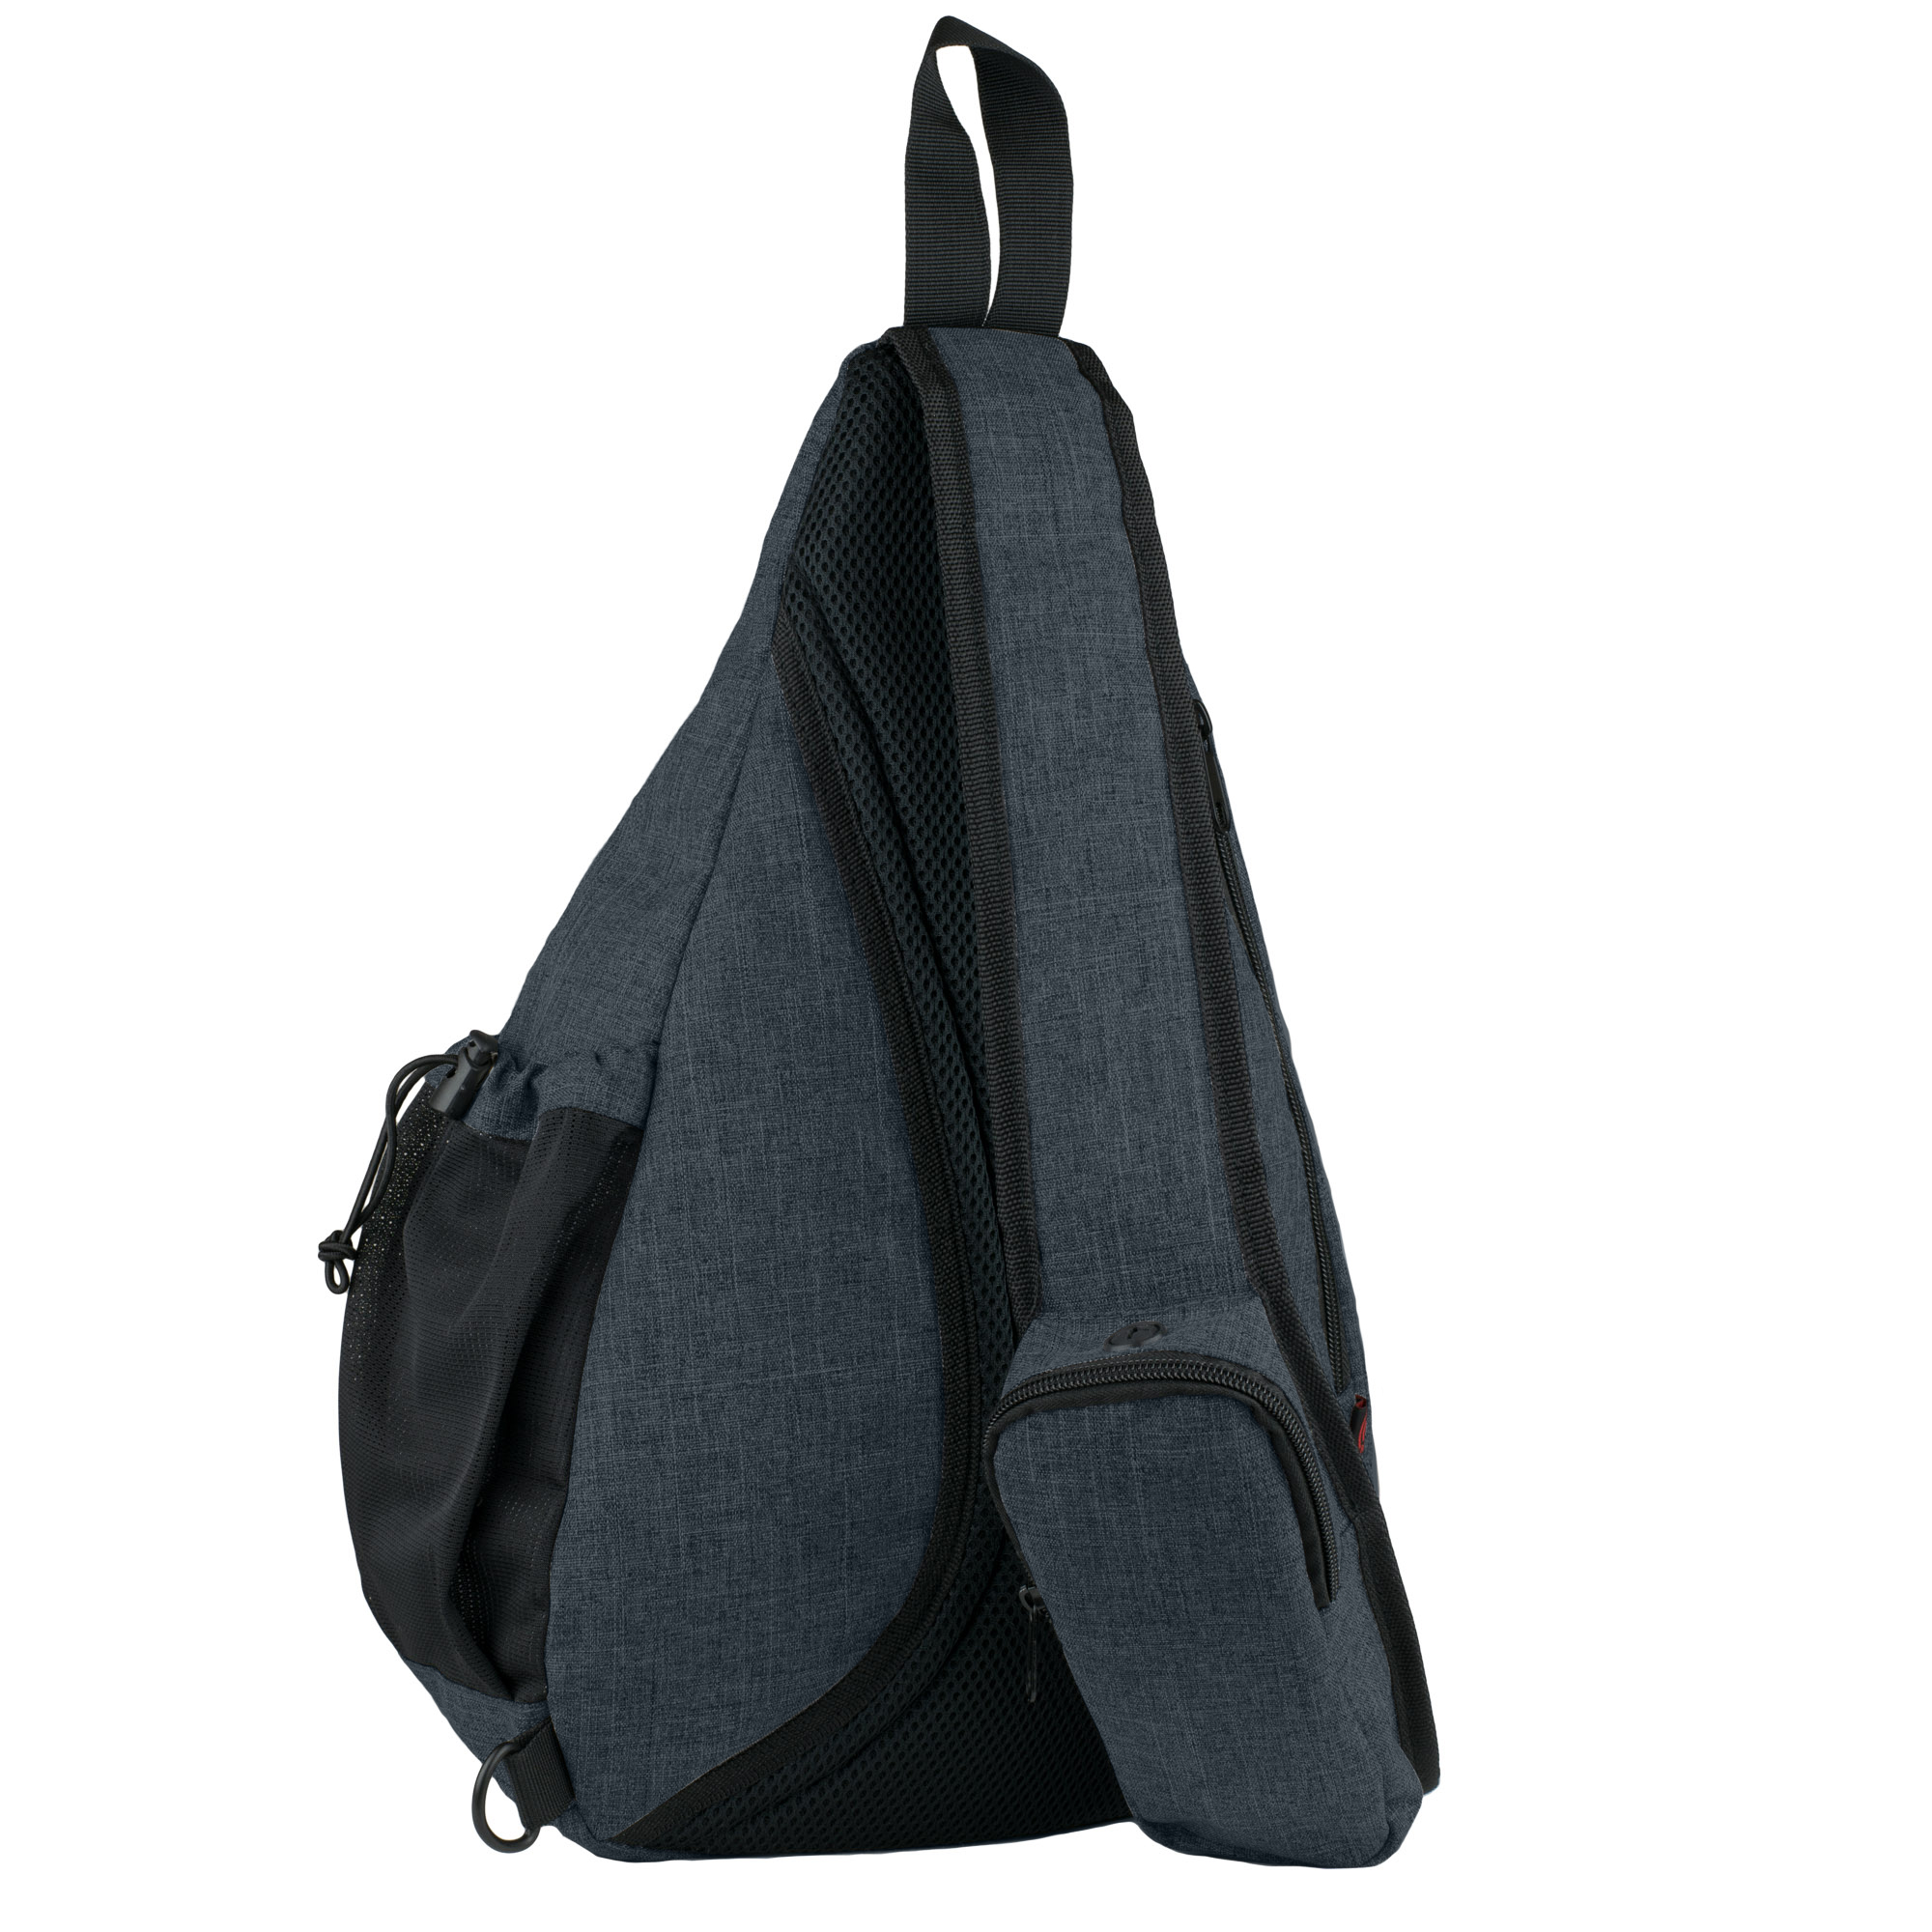 Versatile Canvas Sling Bag Backpack with RFID Security Pocket and Multi Compartments - Black - image 4 of 9